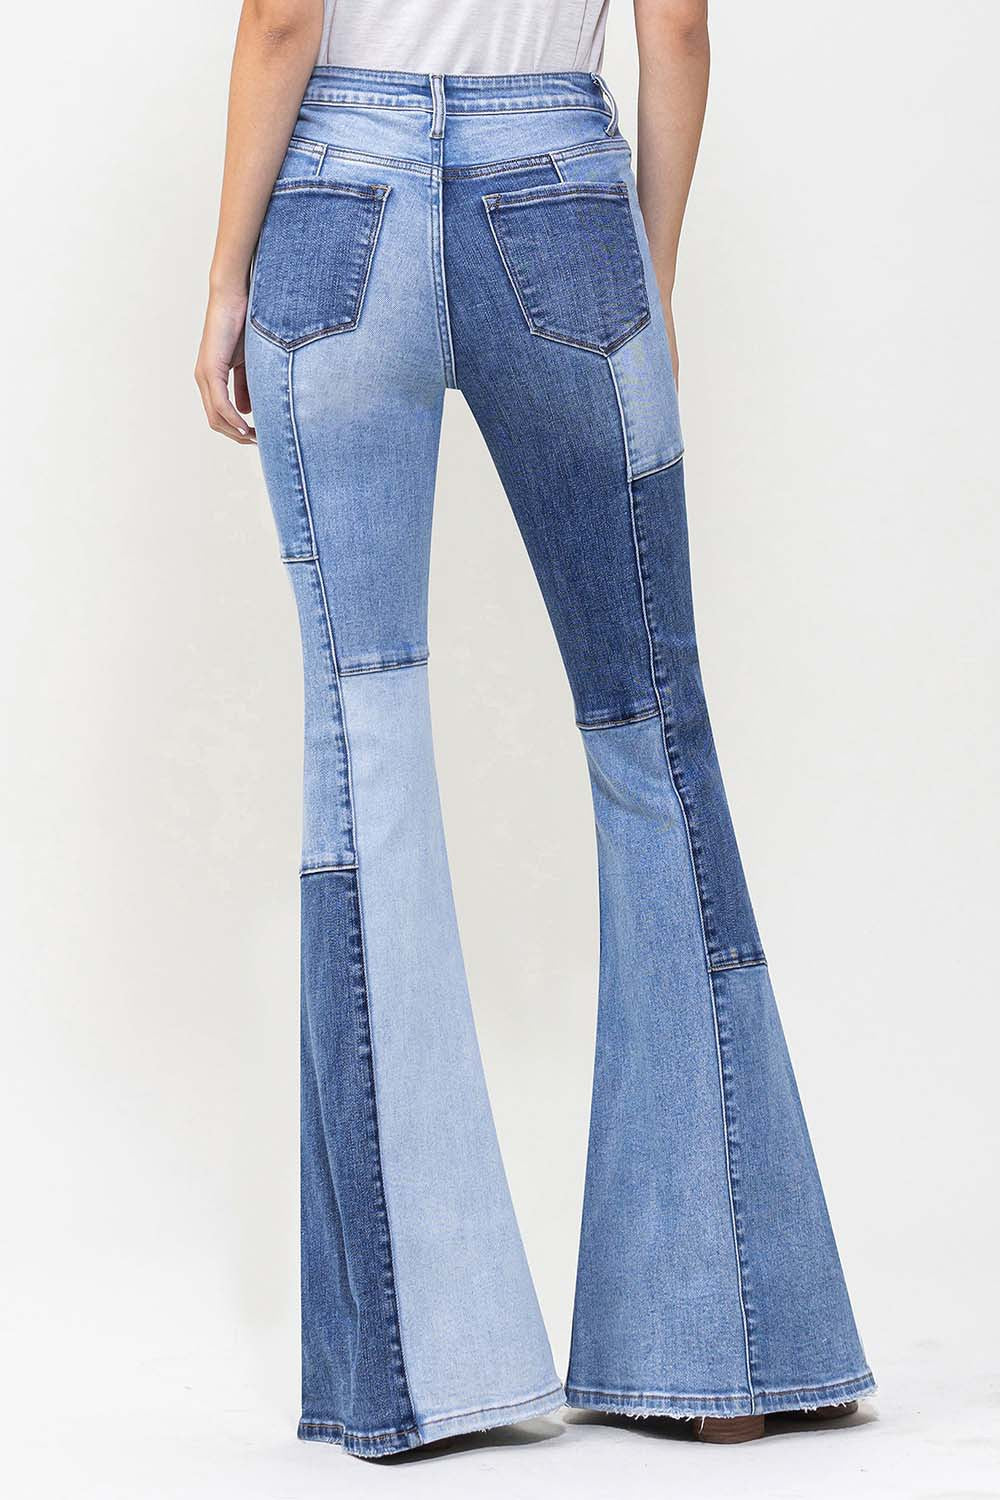 Patchwork Penny High Rise Panel Denim Flare Jeans ~ PREORDER 12/6